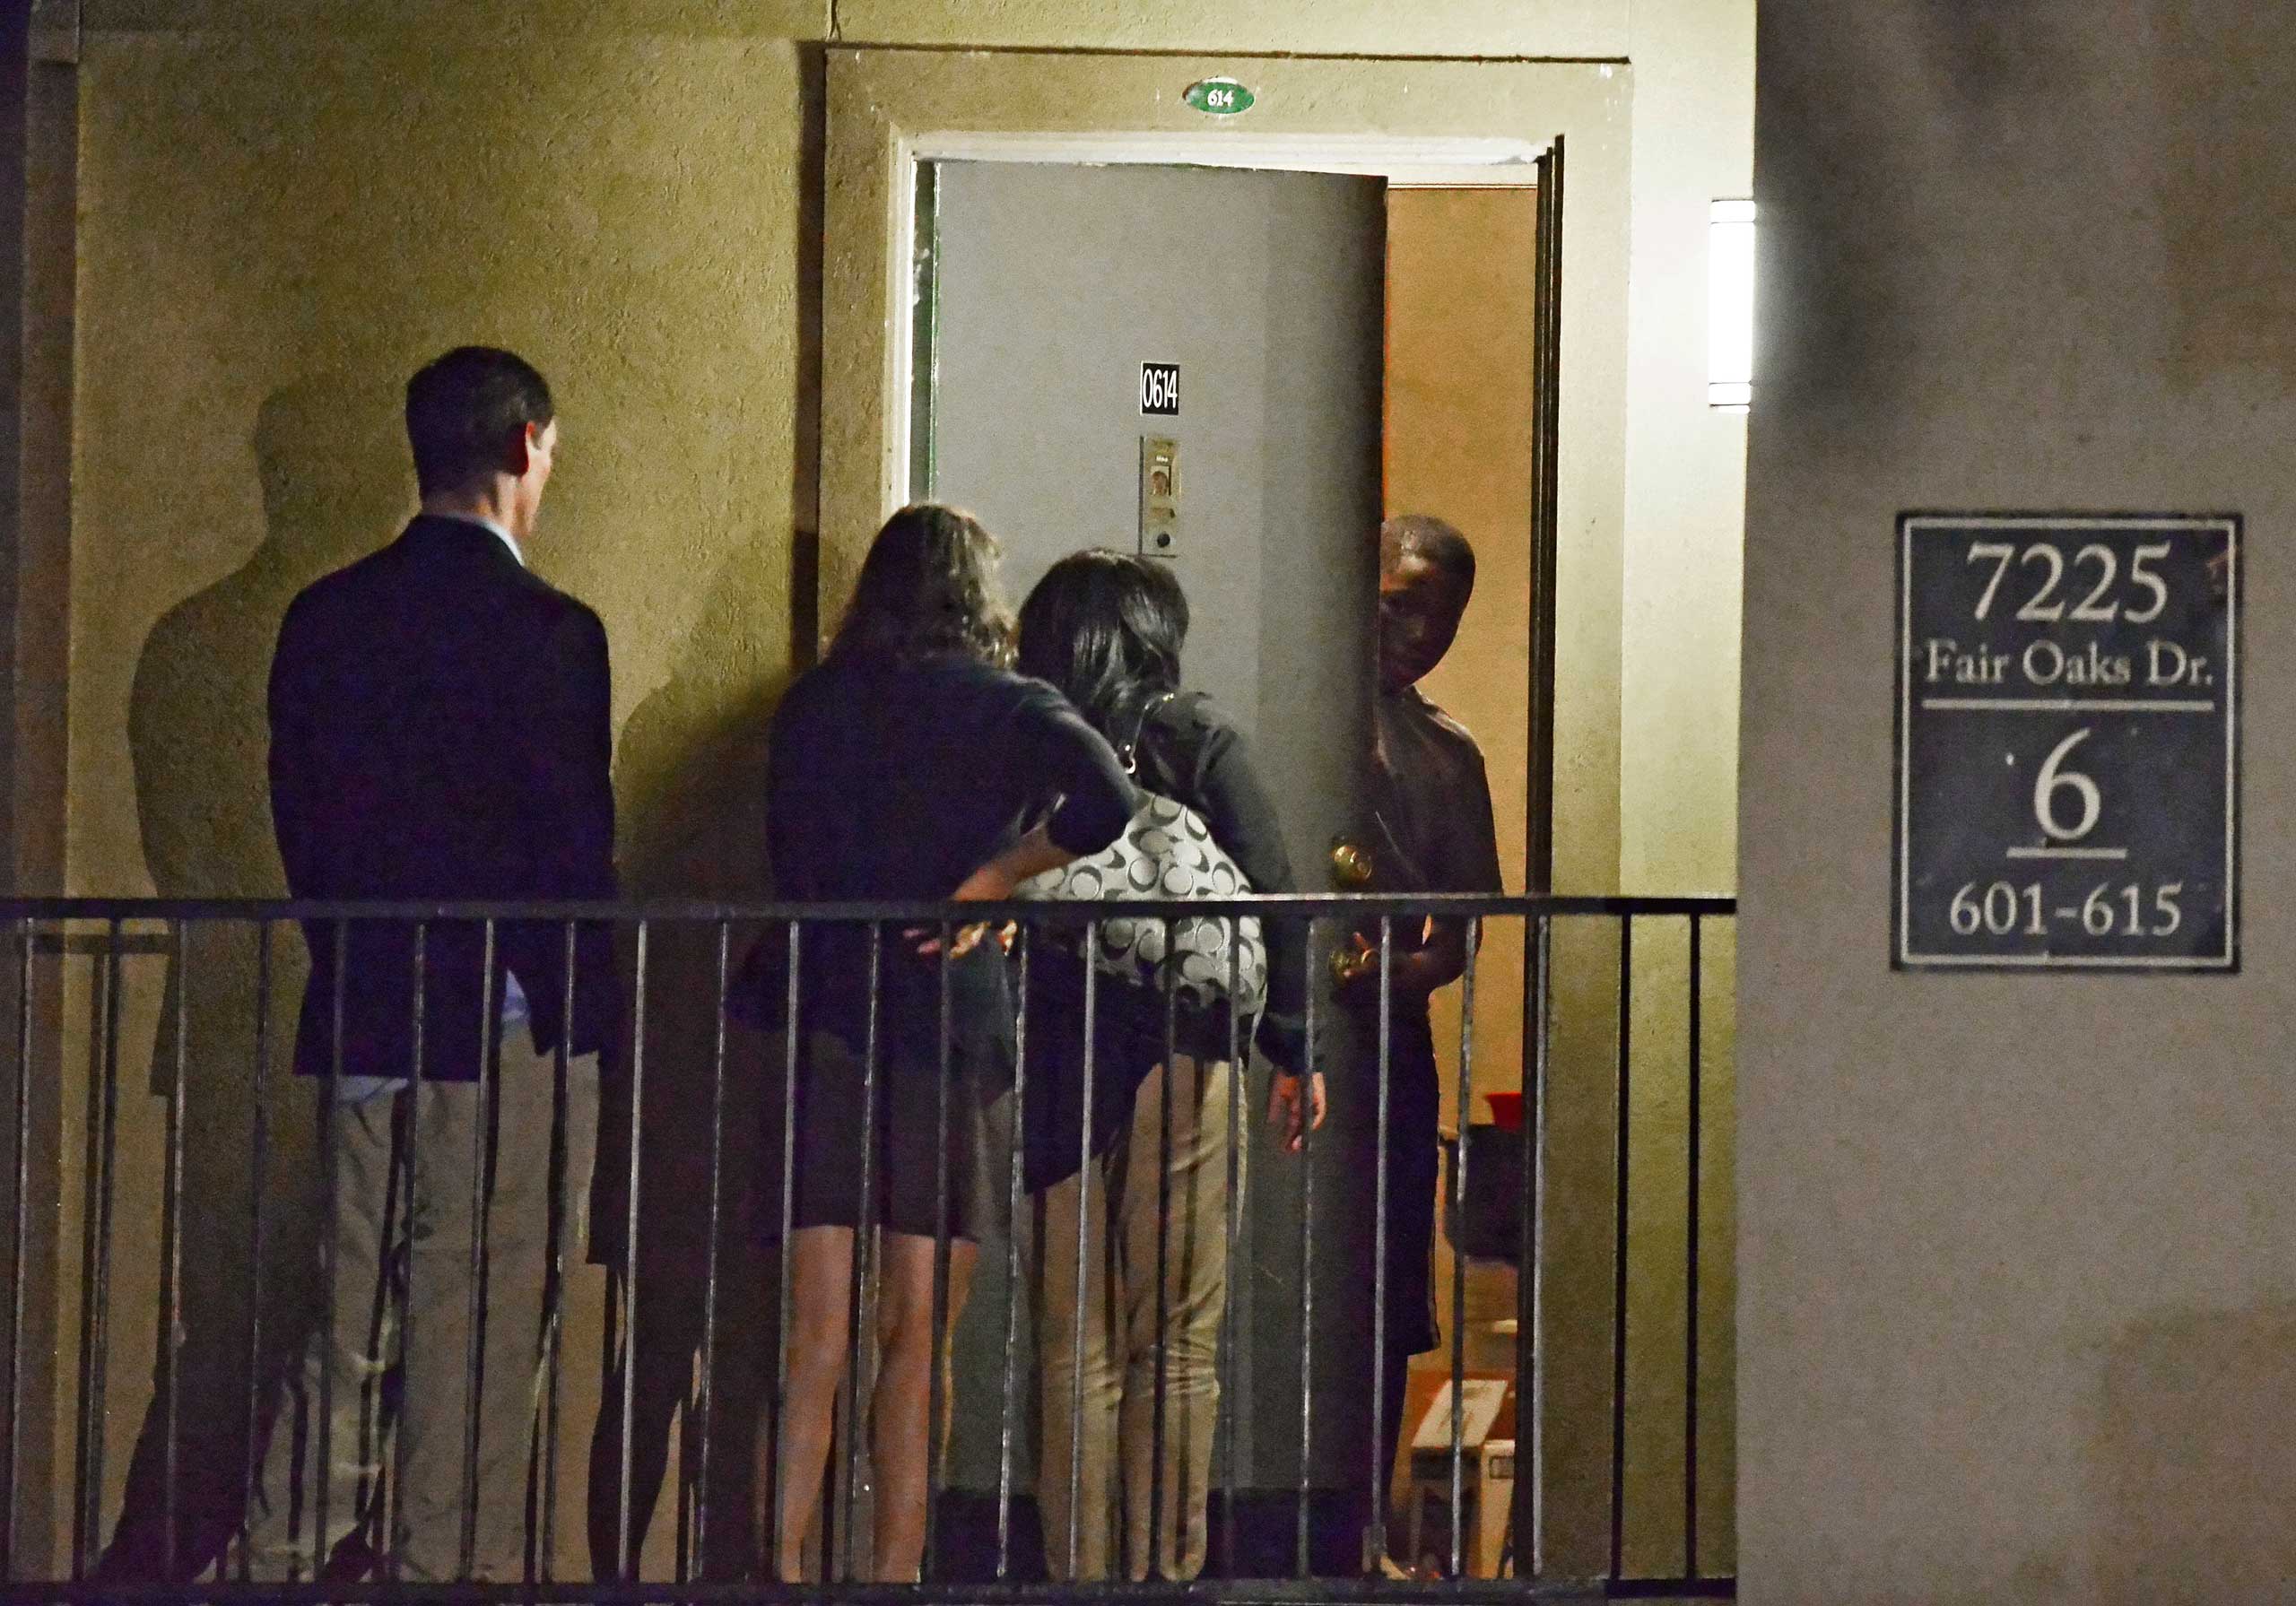 An unidentified person opens the door for Dallas County Judge Clay Jenkins along with two women at the apartment where Thomas Eric Duncan was staying in Dallas, Texas, Oct. 2 2014. (Larry W. Smith—EPA)